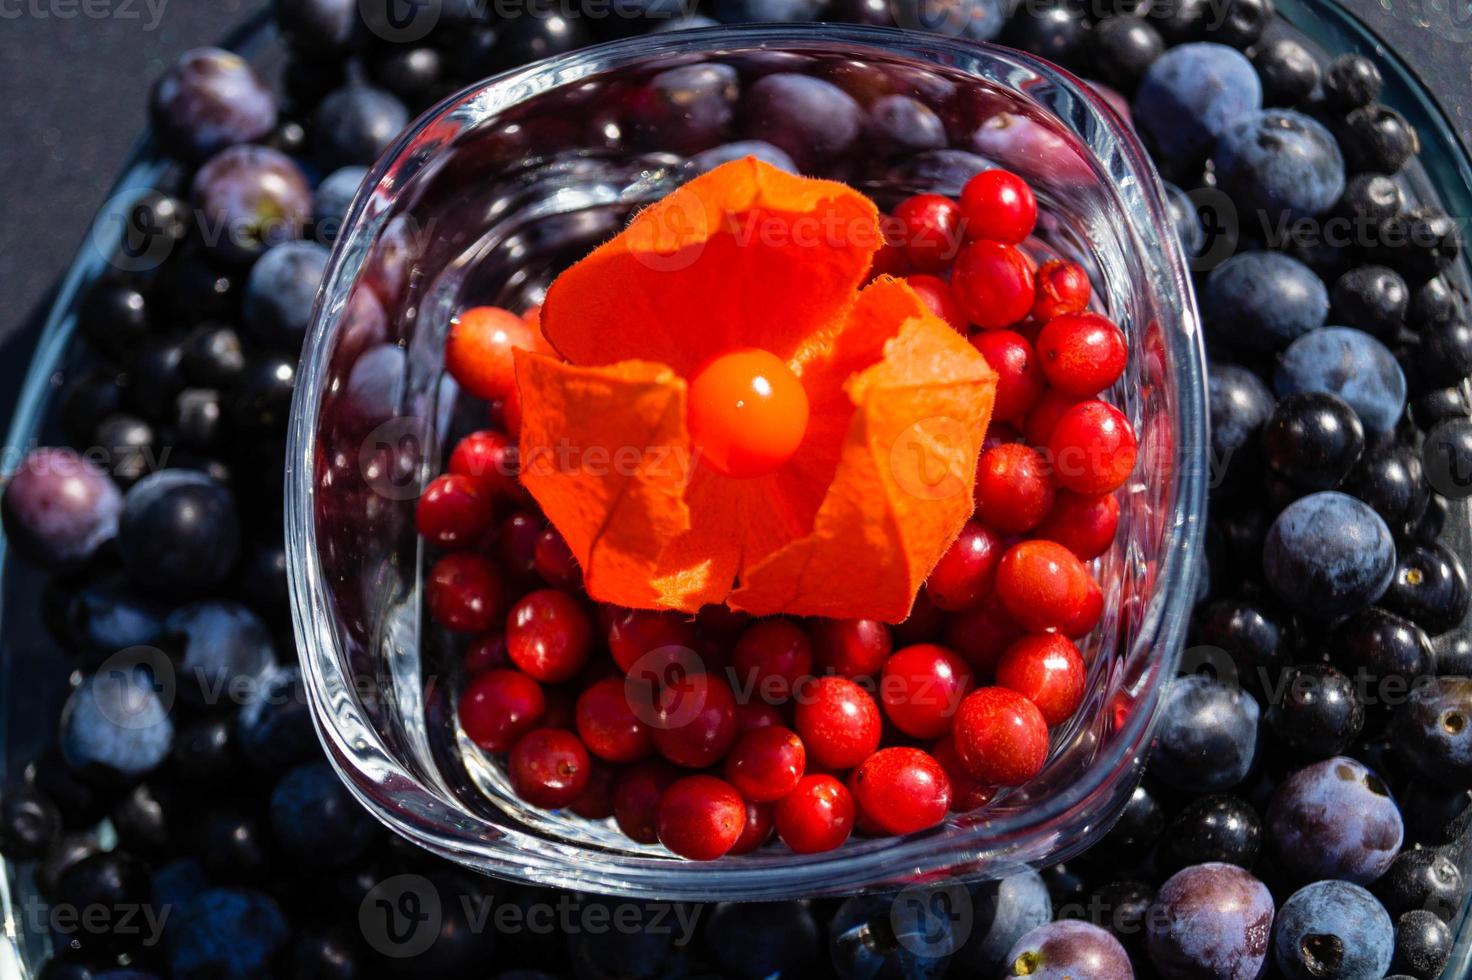 Alternative Medicine with pharmaceutical herbs fruits and berries photo